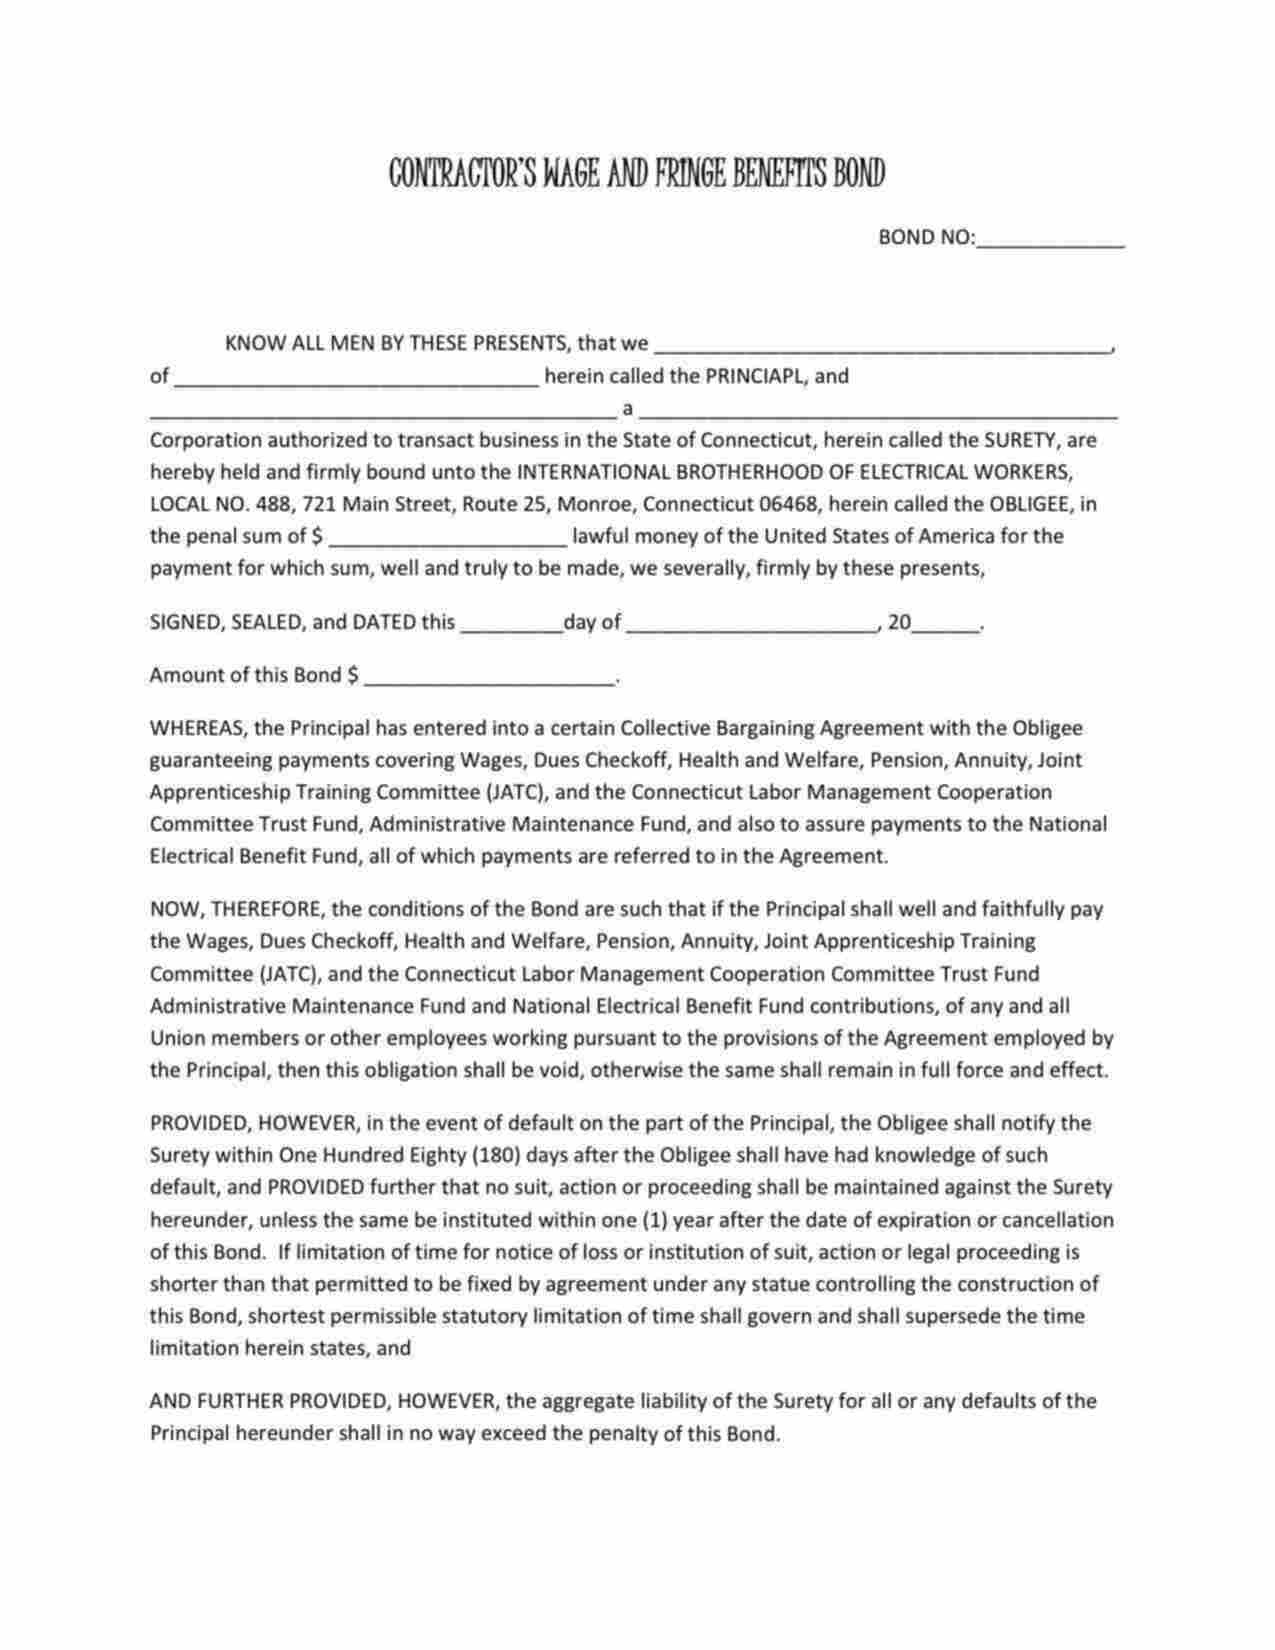 Connecticut Wage and Welfare Bond Form